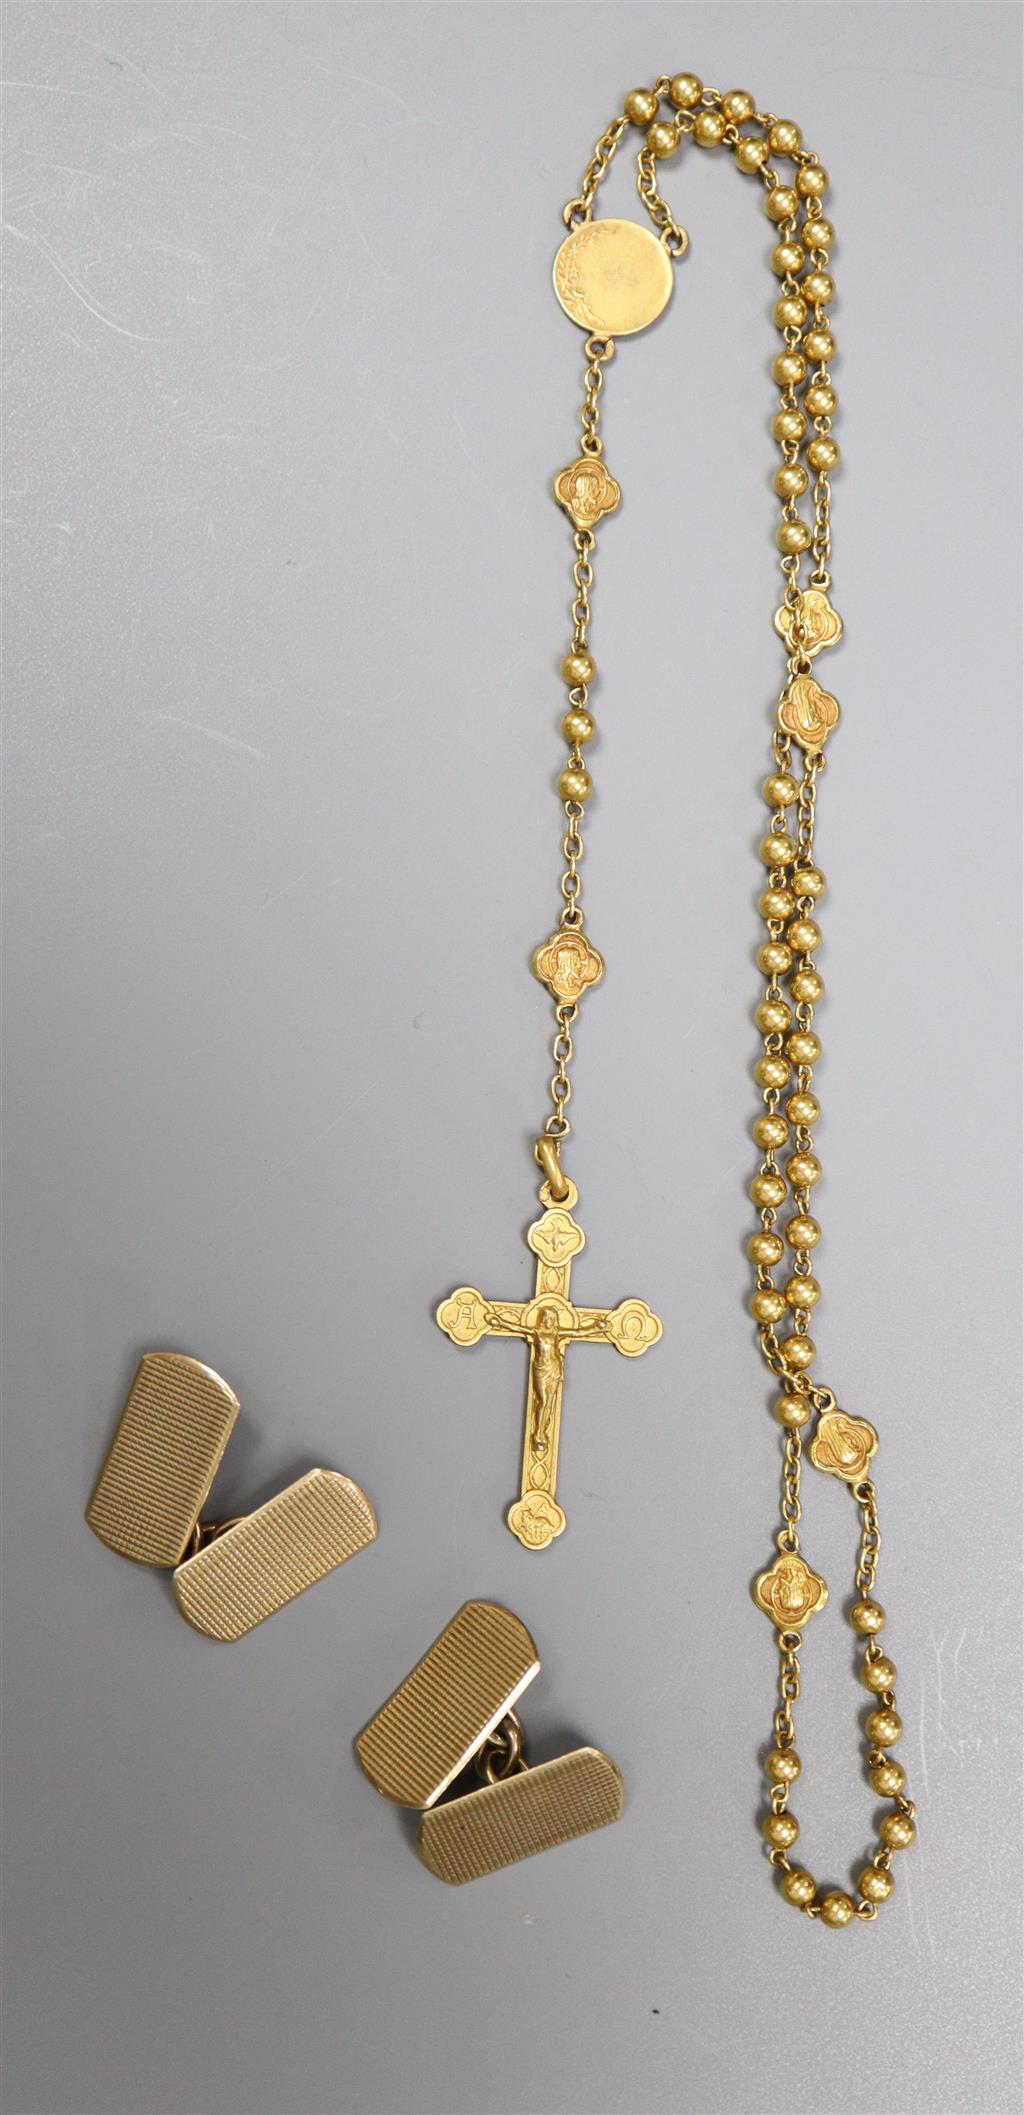 A pair of engine-turned 9ct gold oval cufflinks and a yellow metal rosary (tests as 18ct) in a small leather case